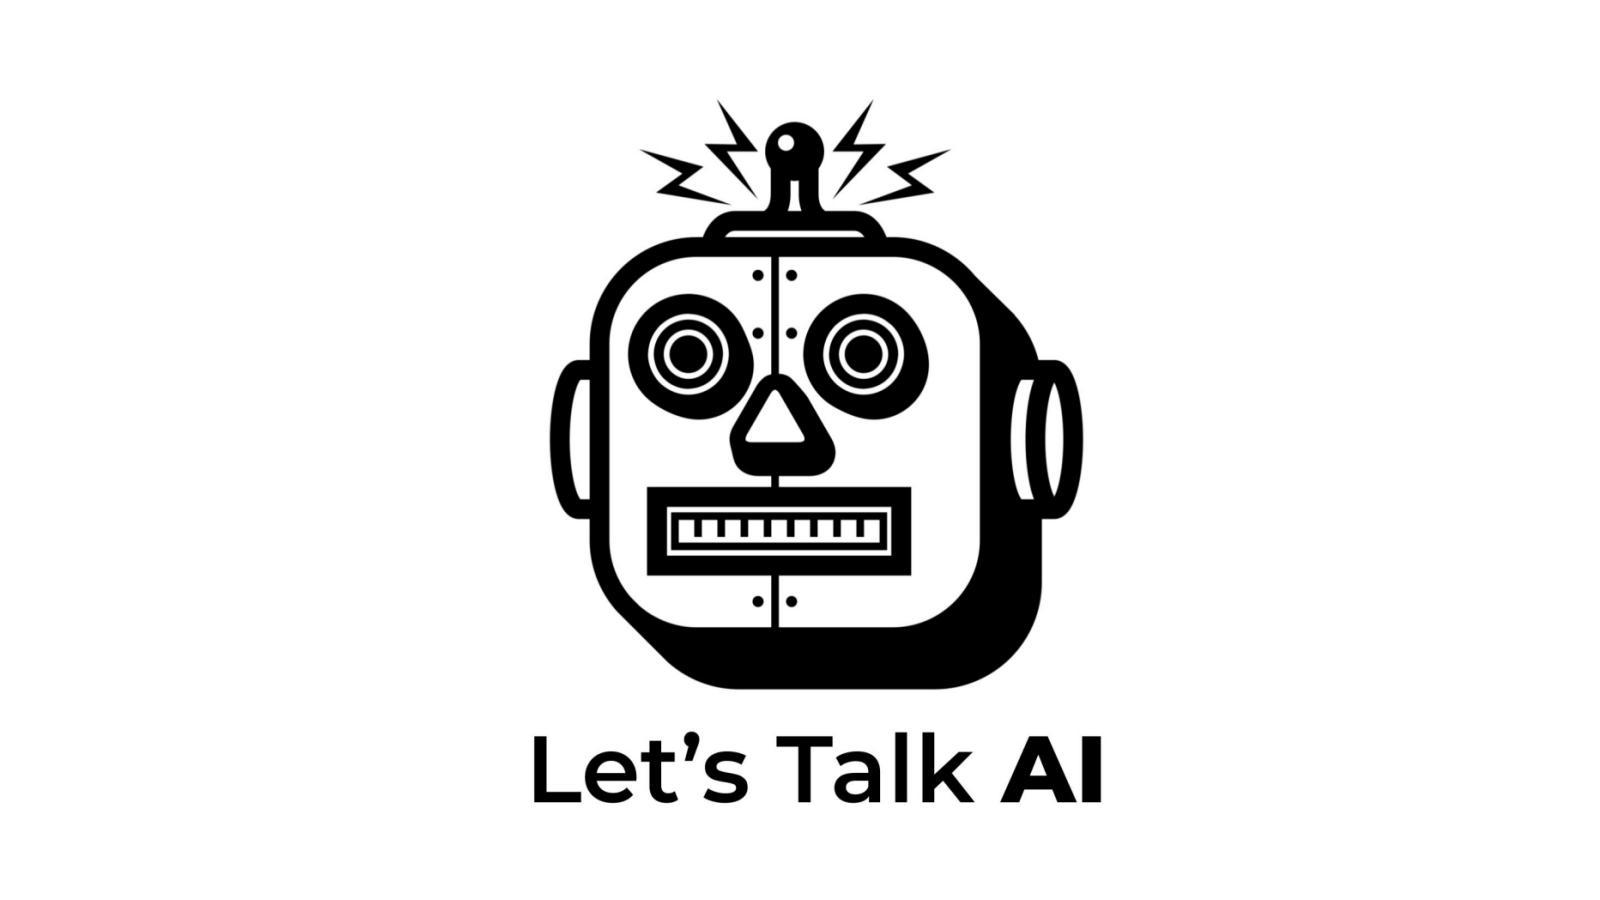 Let's Talk about Robotics and AI